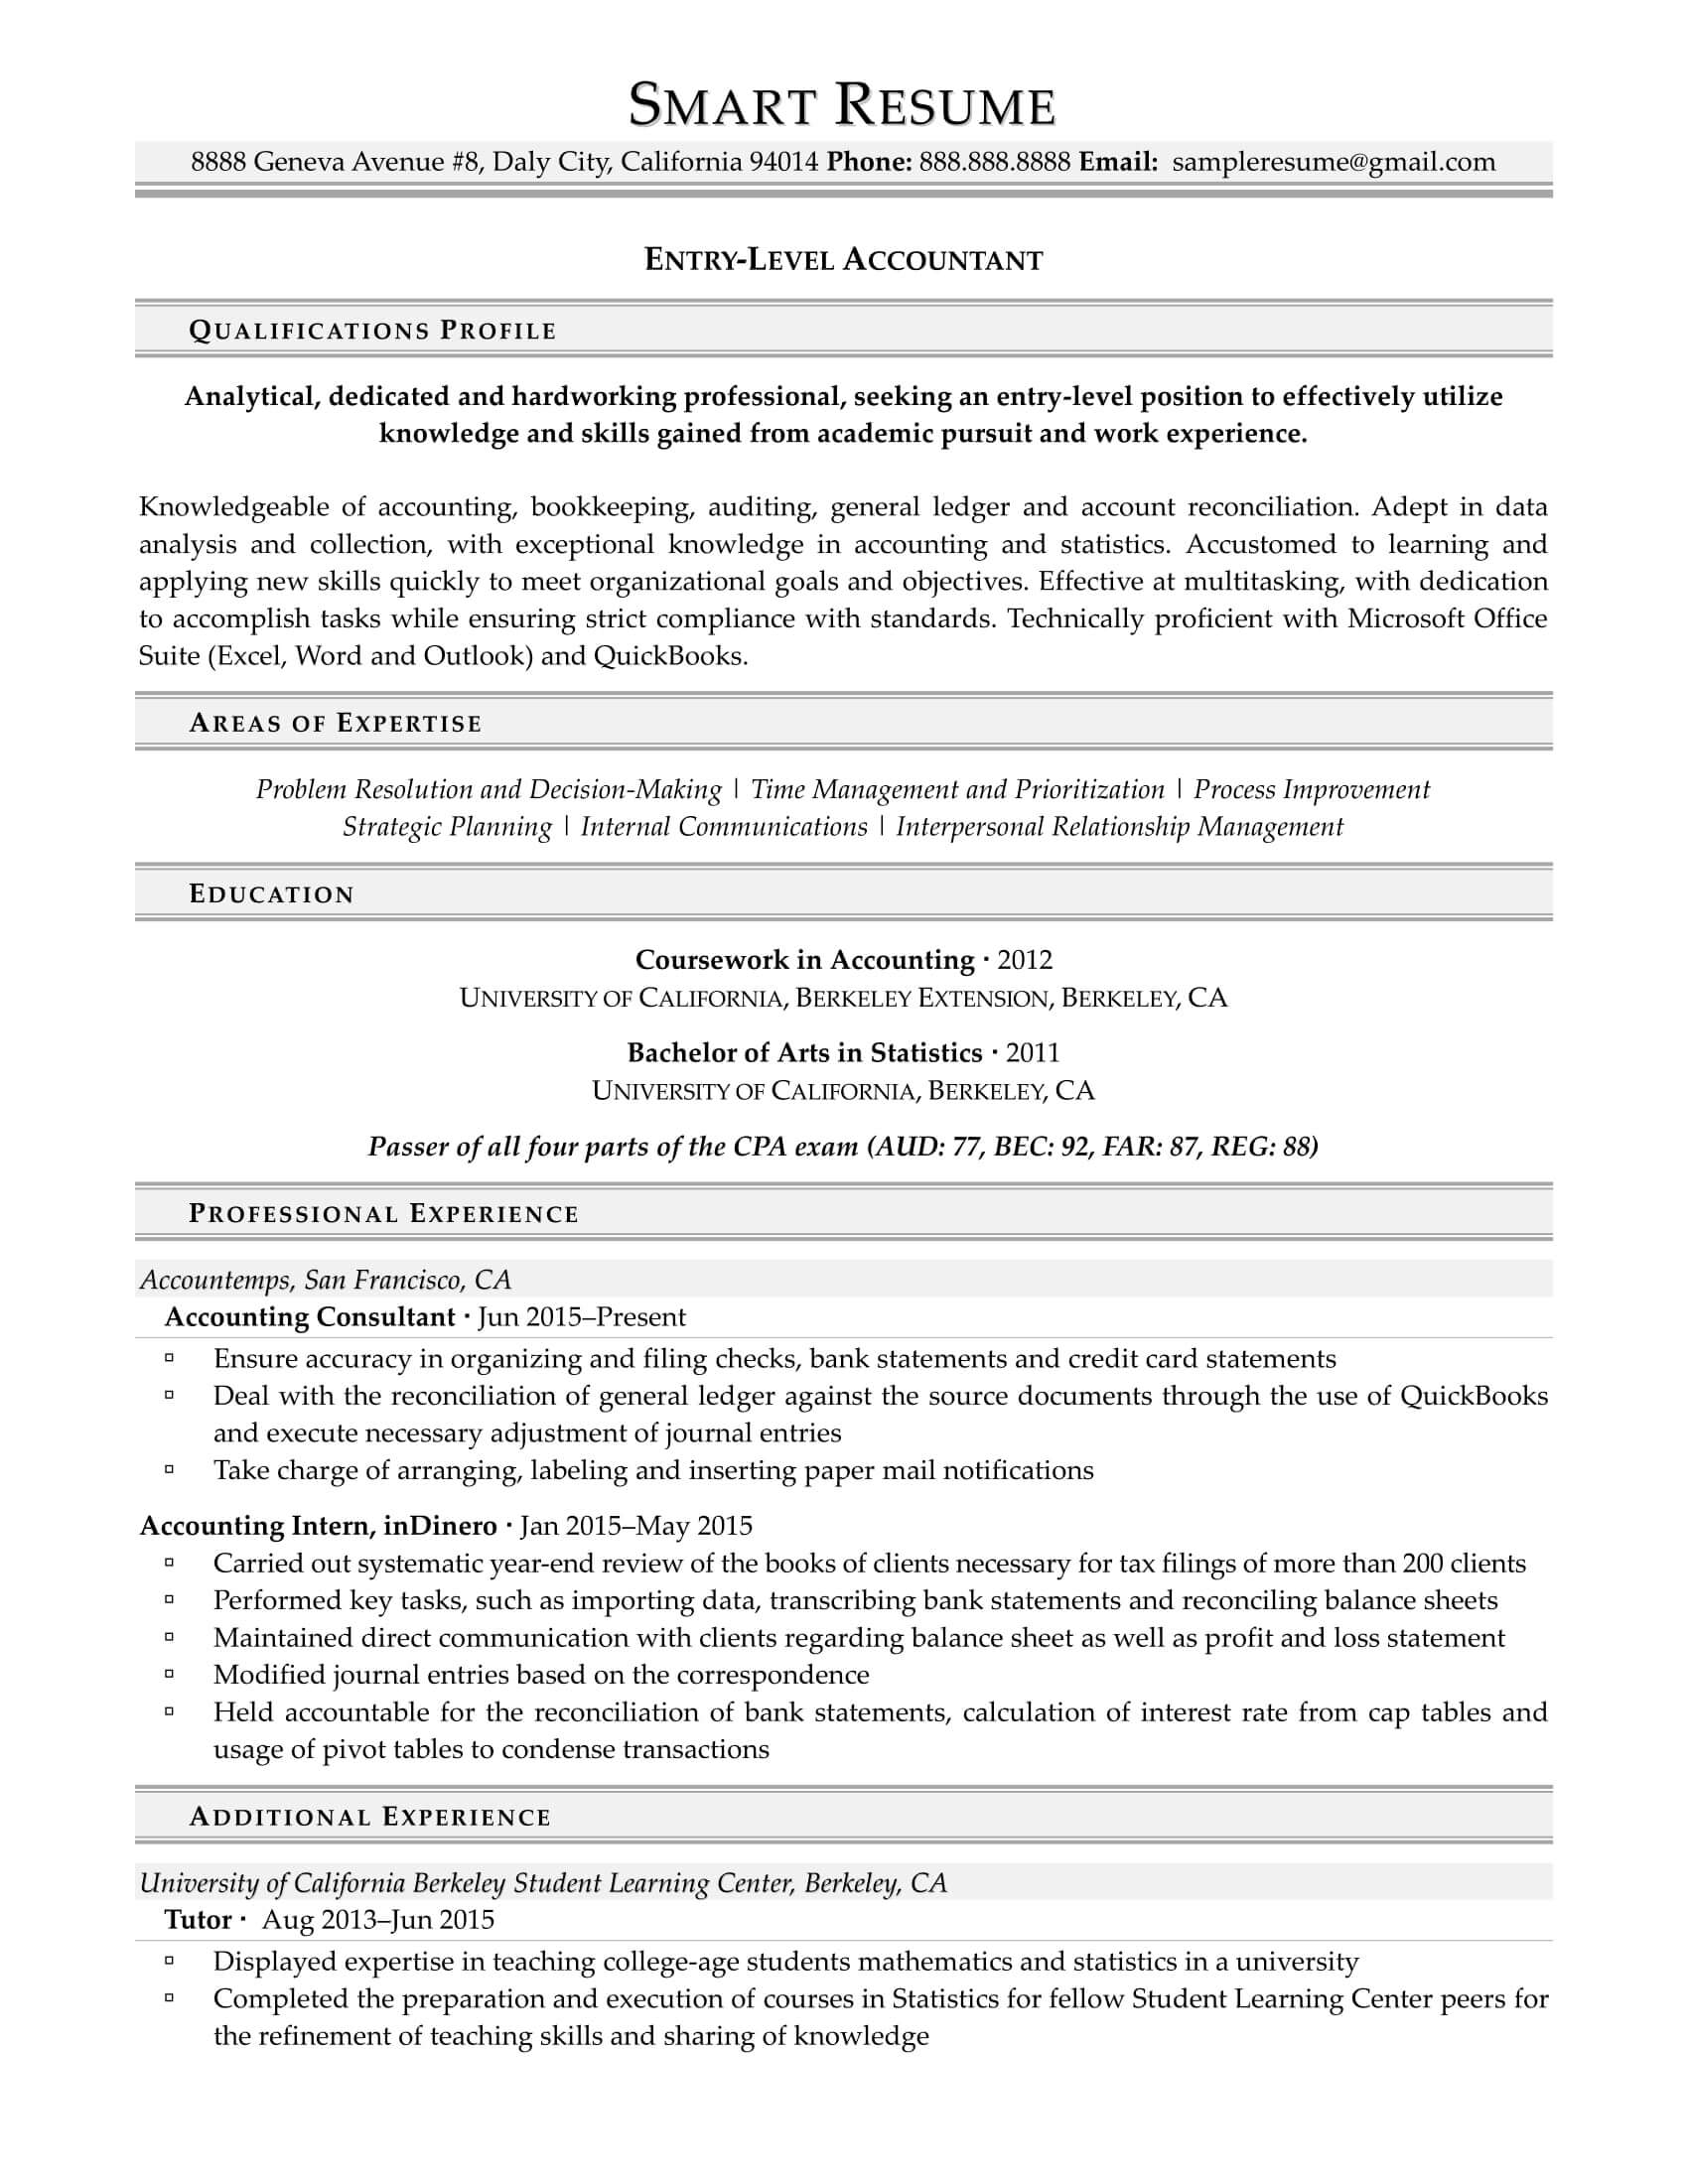 Entry-Level Accountant Resume Sample